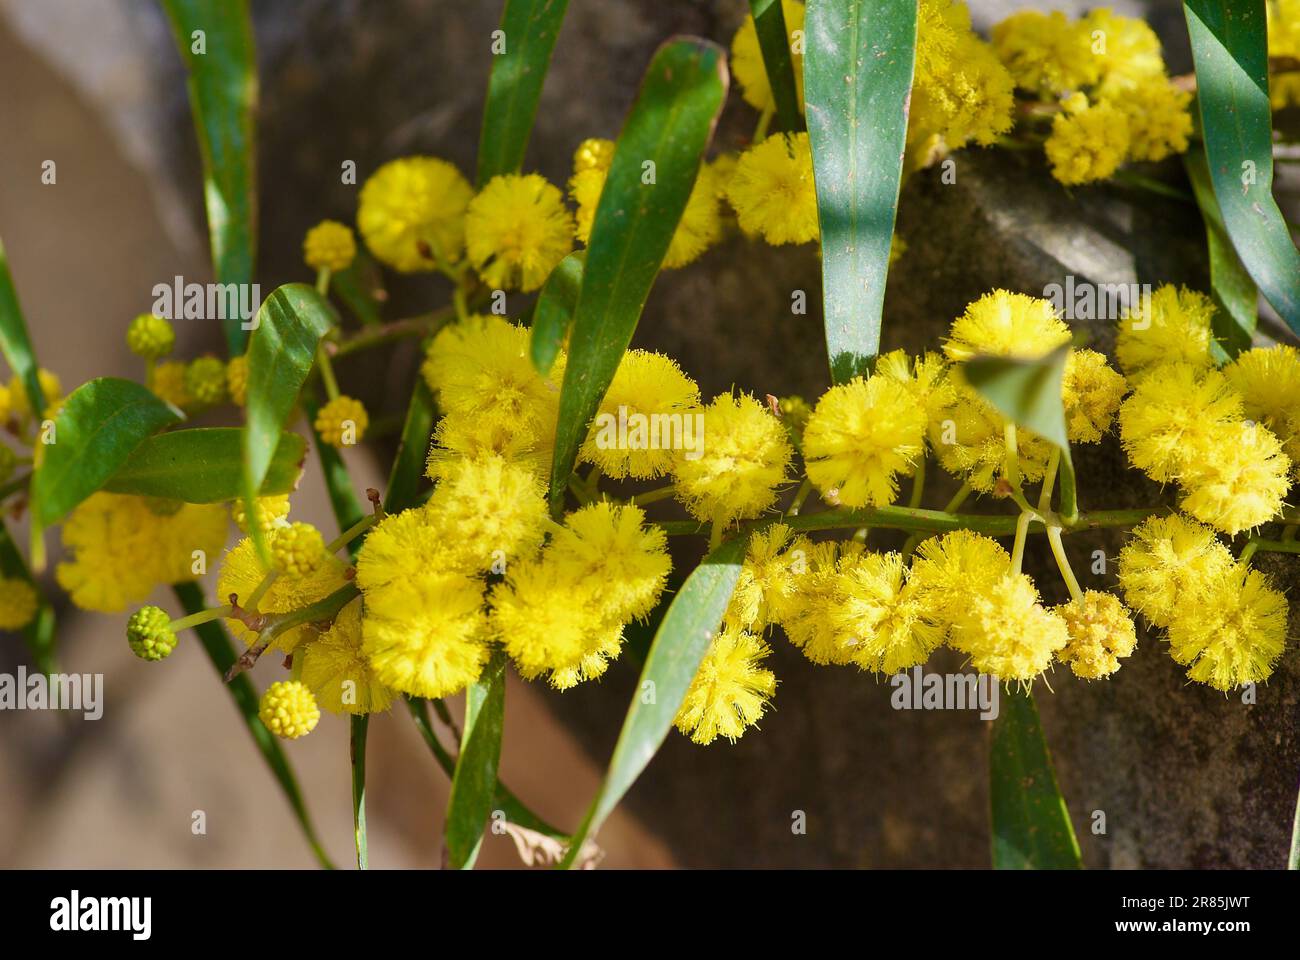 Branch of acacia tree with fluffy blooming yellow flowers in spring. Stock Photo